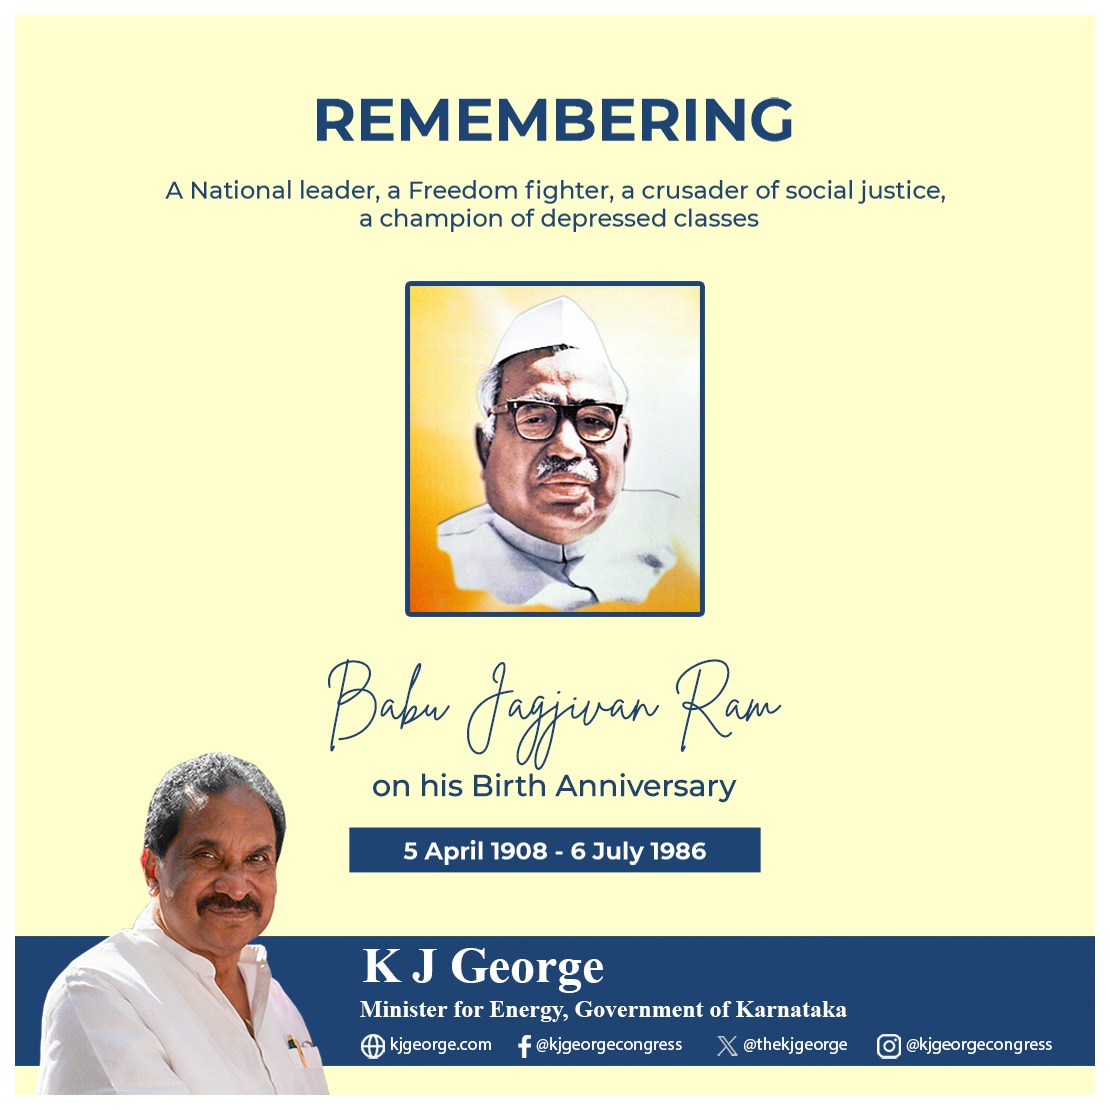 On the occasion of Shri. #BabuJagjivanRam Ji's birth anniversary today, I offer my humble tributes. A social activist, freedom fighter, and former Deputy PM of India, he dedicated his life to the upliftment and empowerment of the most deprived sections of society. Let's honour…